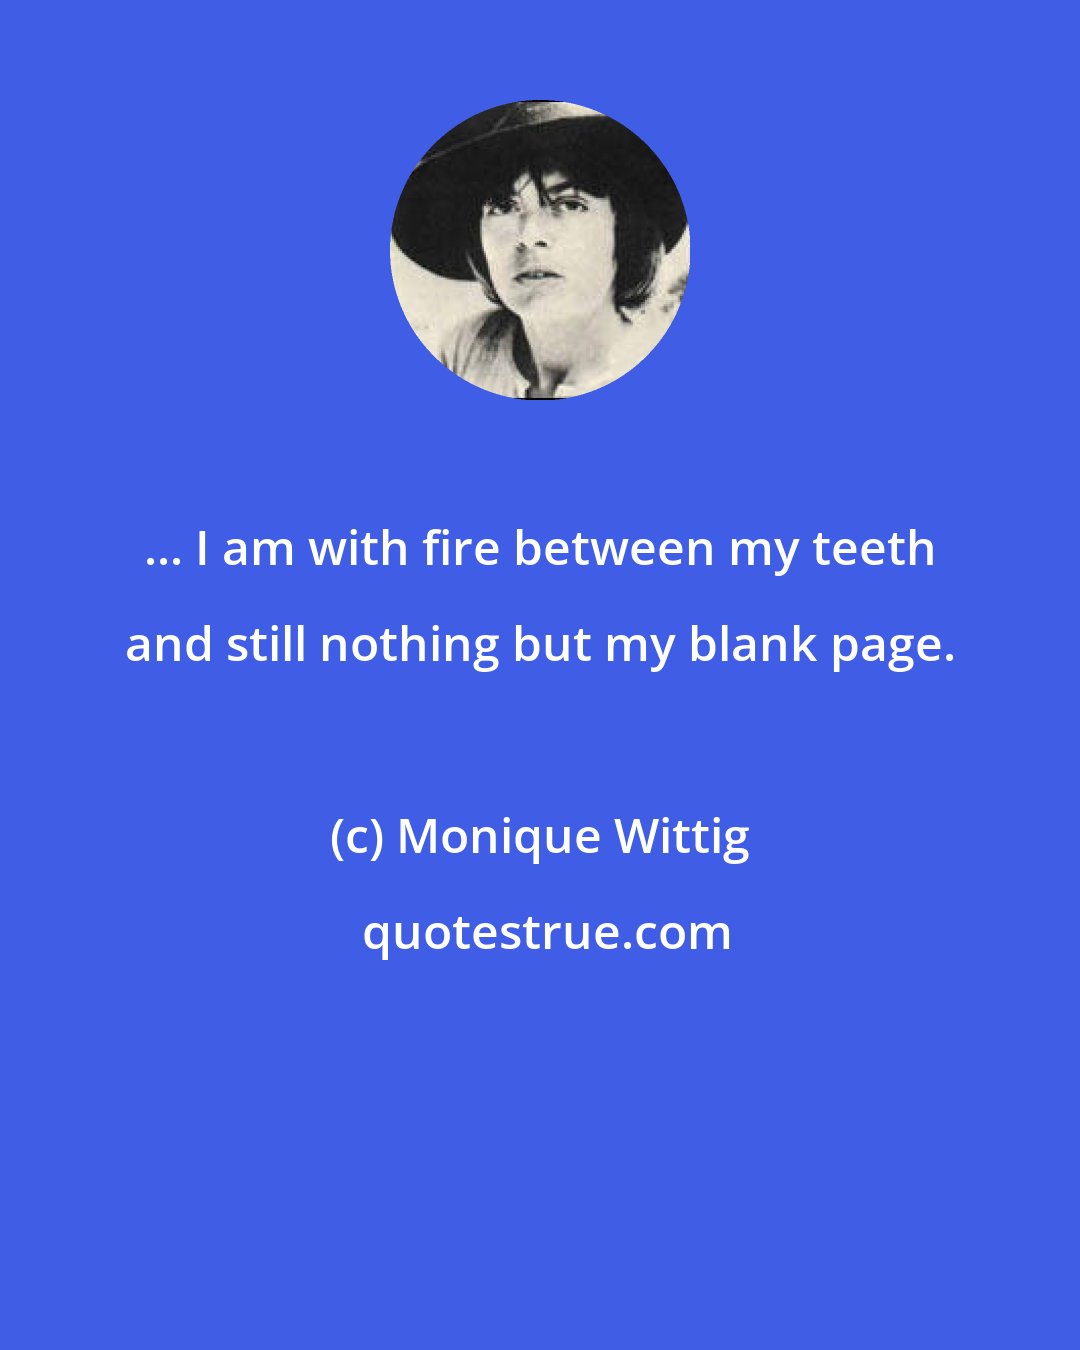 Monique Wittig: ... I am with fire between my teeth and still nothing but my blank page.